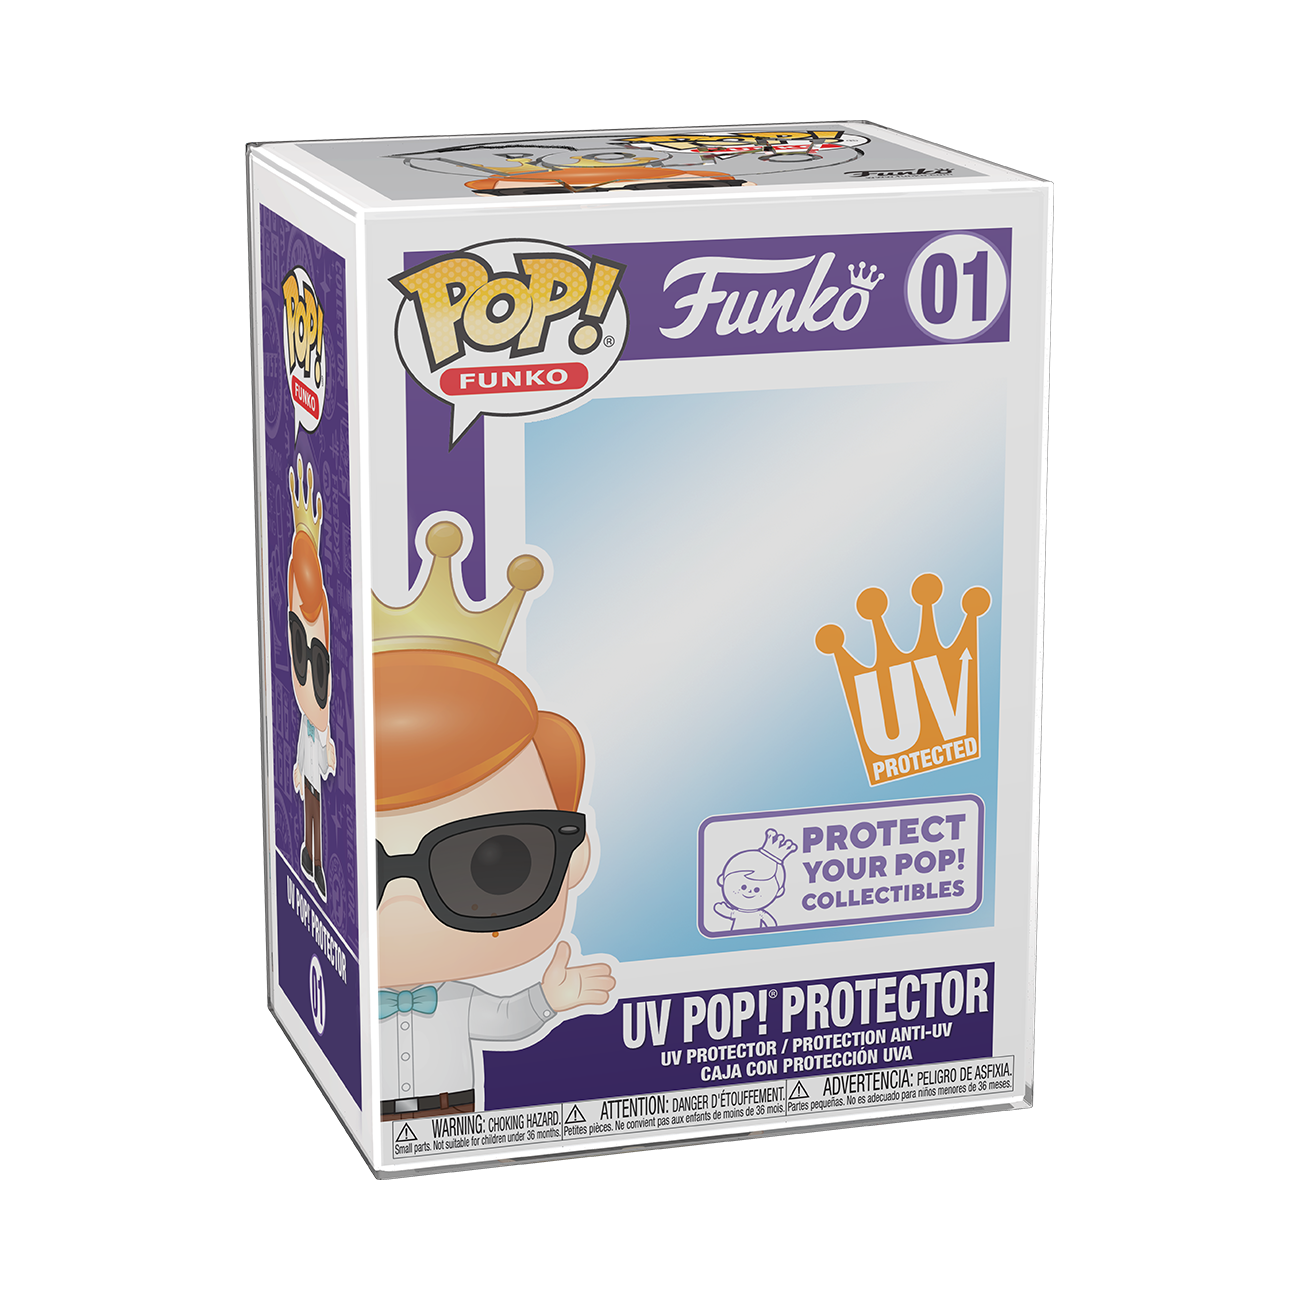 Protector 2-PACK STANDARD HEROES PROTECTOR - Protection plastique pour  Funko Pop